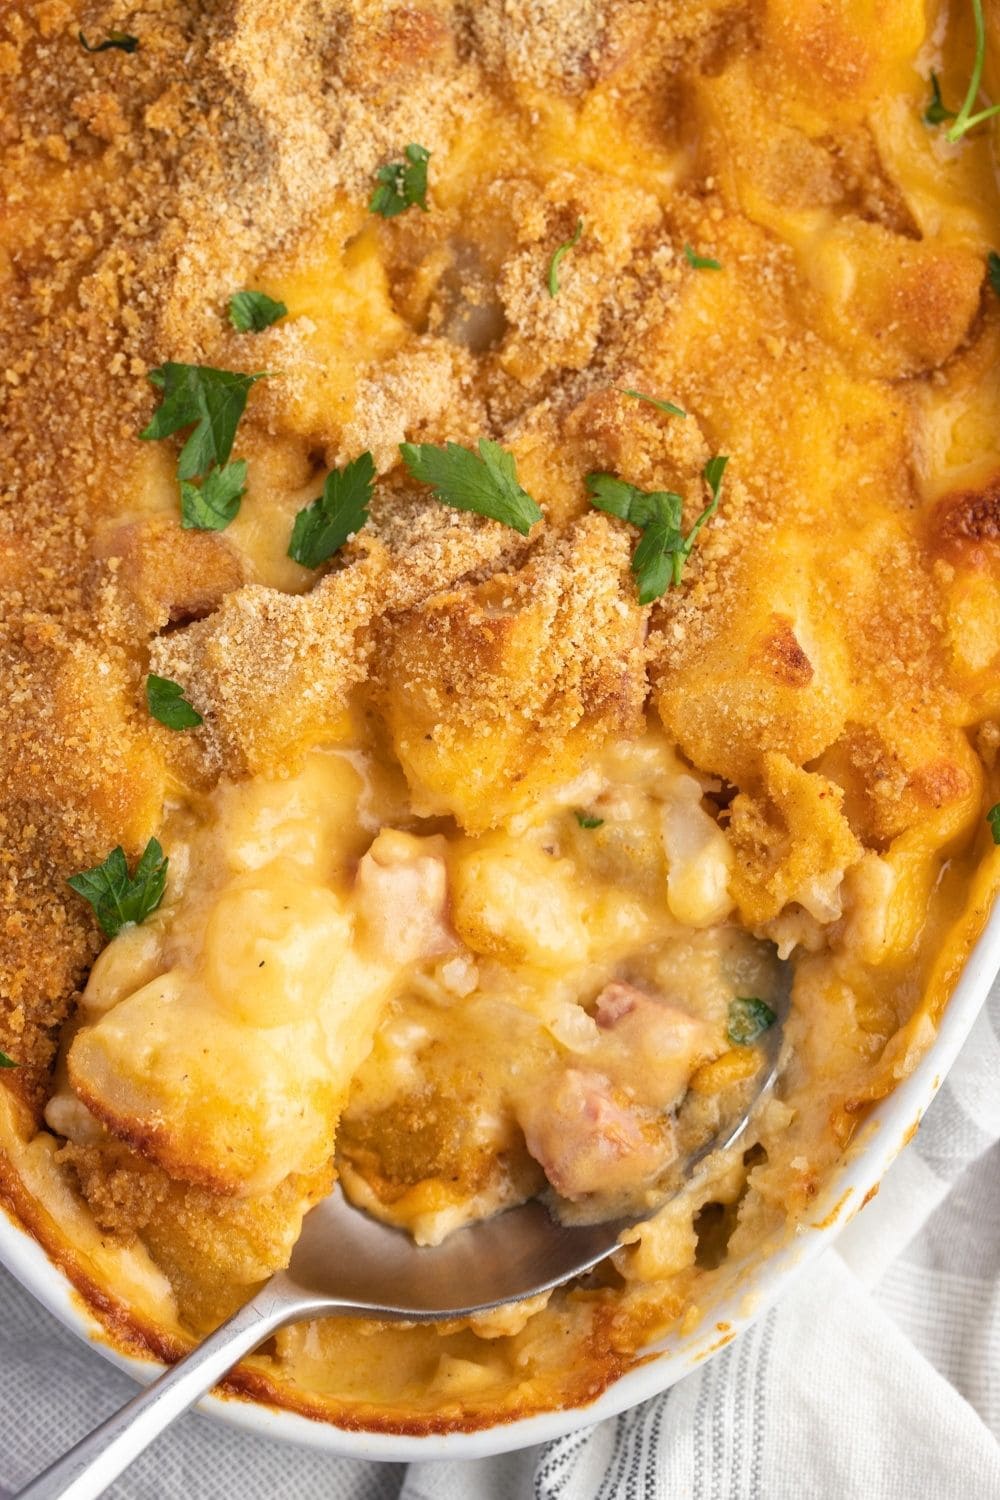 Spoon Digging Into Ham and Potato Casserole with Herbs